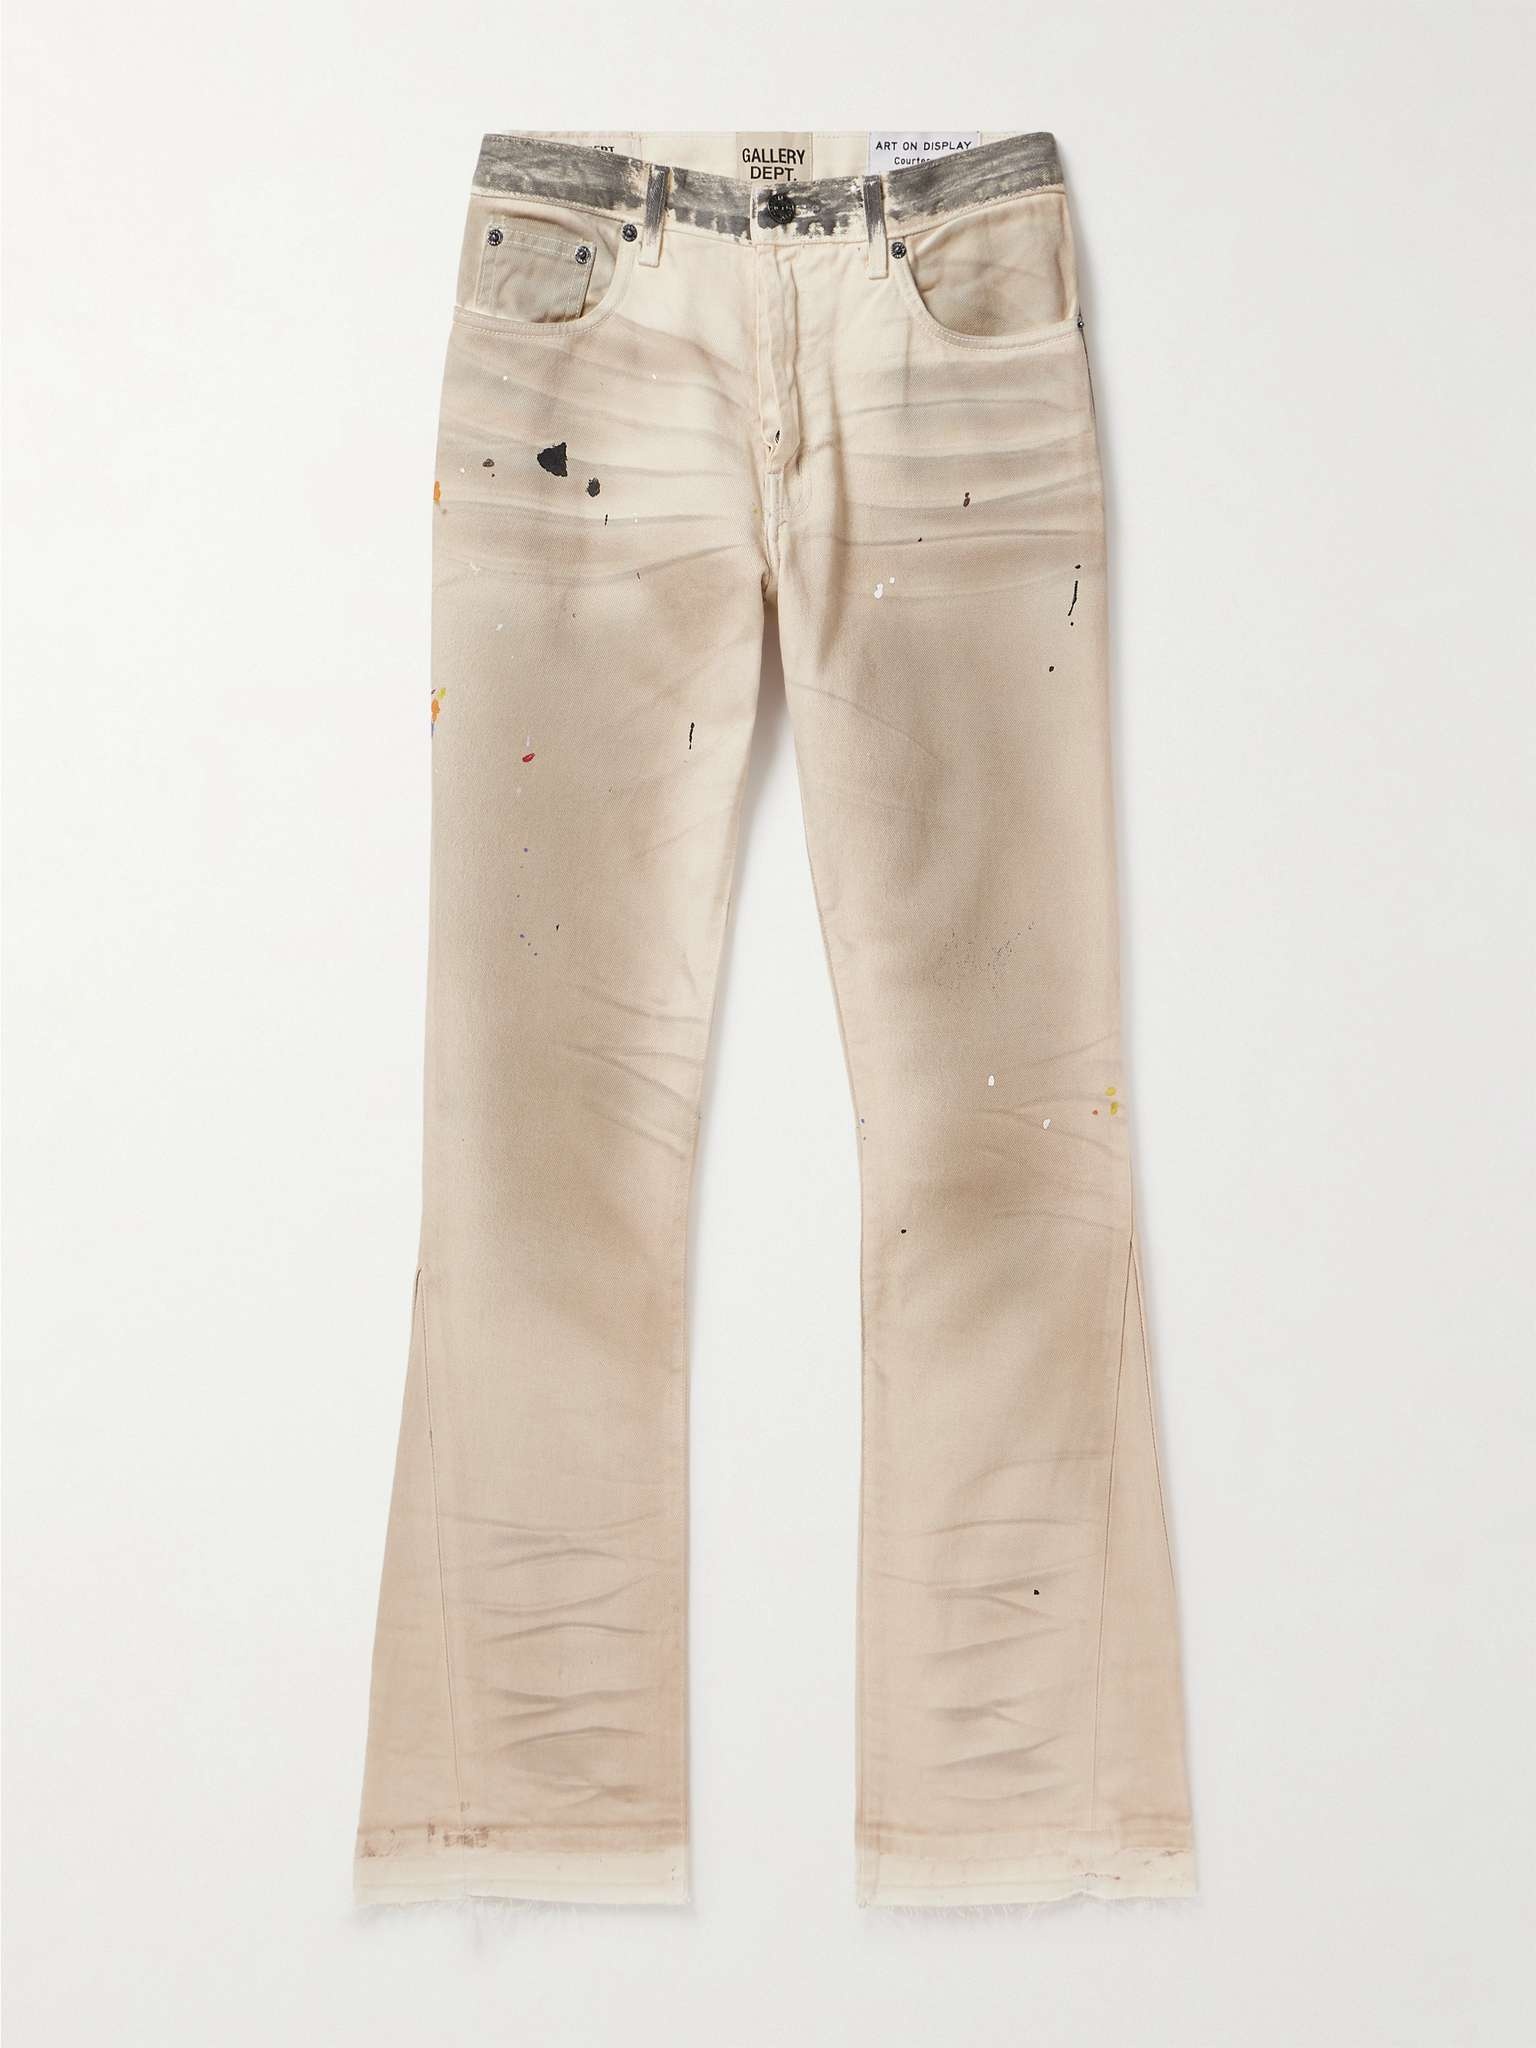 Hollywood Flared Distressed Paint-Splattered Jeans - 1